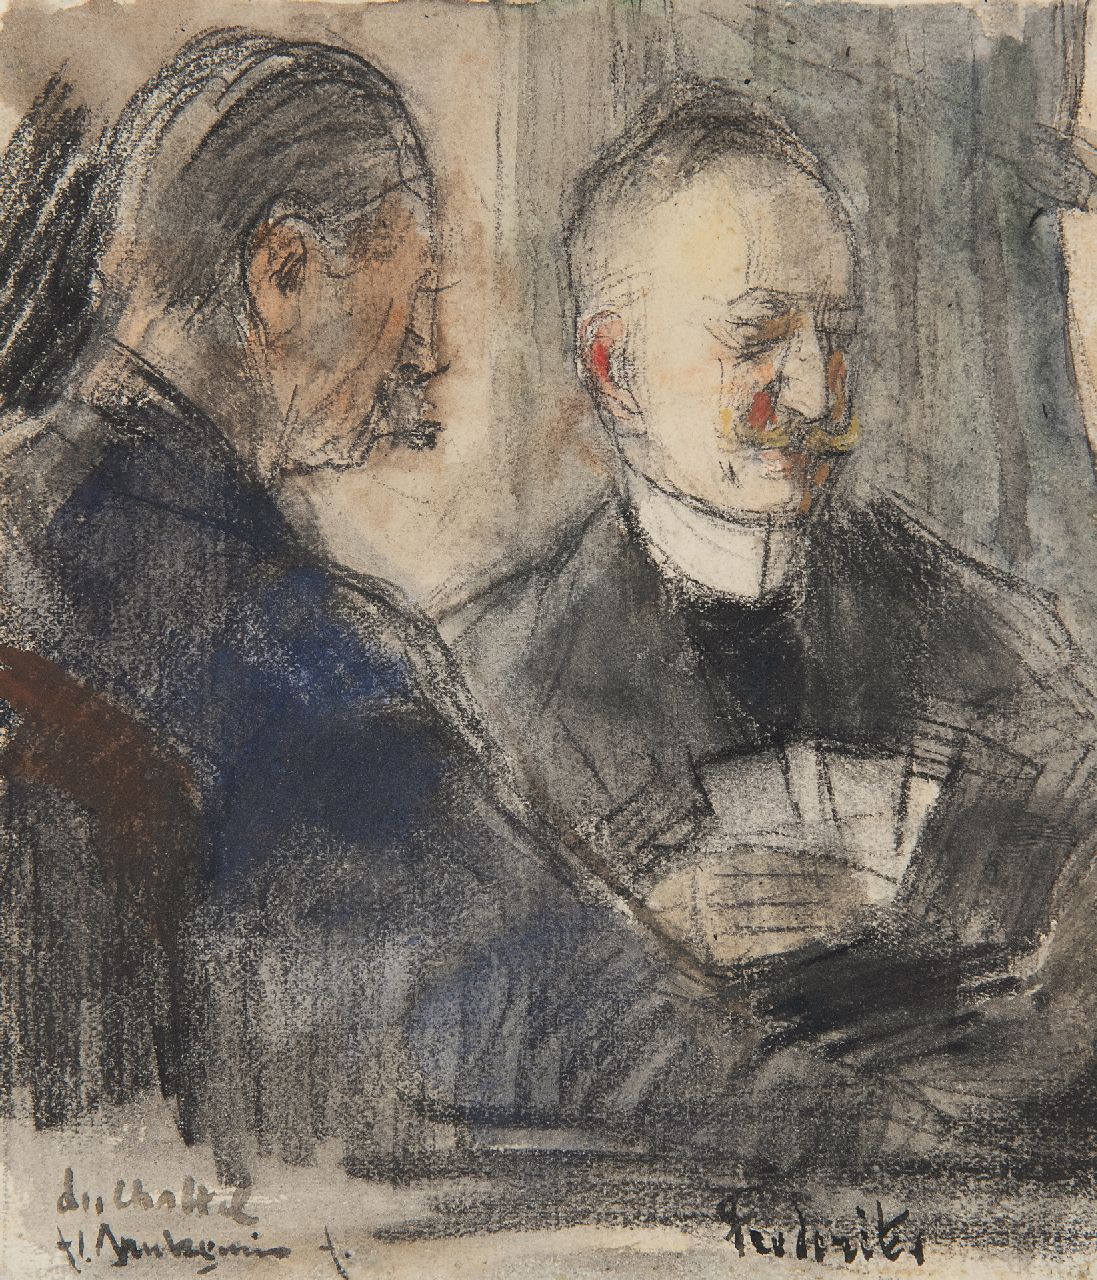 Arntzenius P.F.N.J.  | Pieter Florentius Nicolaas Jacobus 'Floris' Arntzenius | Watercolours and drawings offered for sale | F.J. van Rossum du Chattel and J.A. Frederiks playing cards at Pulchri Studio, crayon and watercolour on paper 13.7 x 11.6 cm, signed l.l.